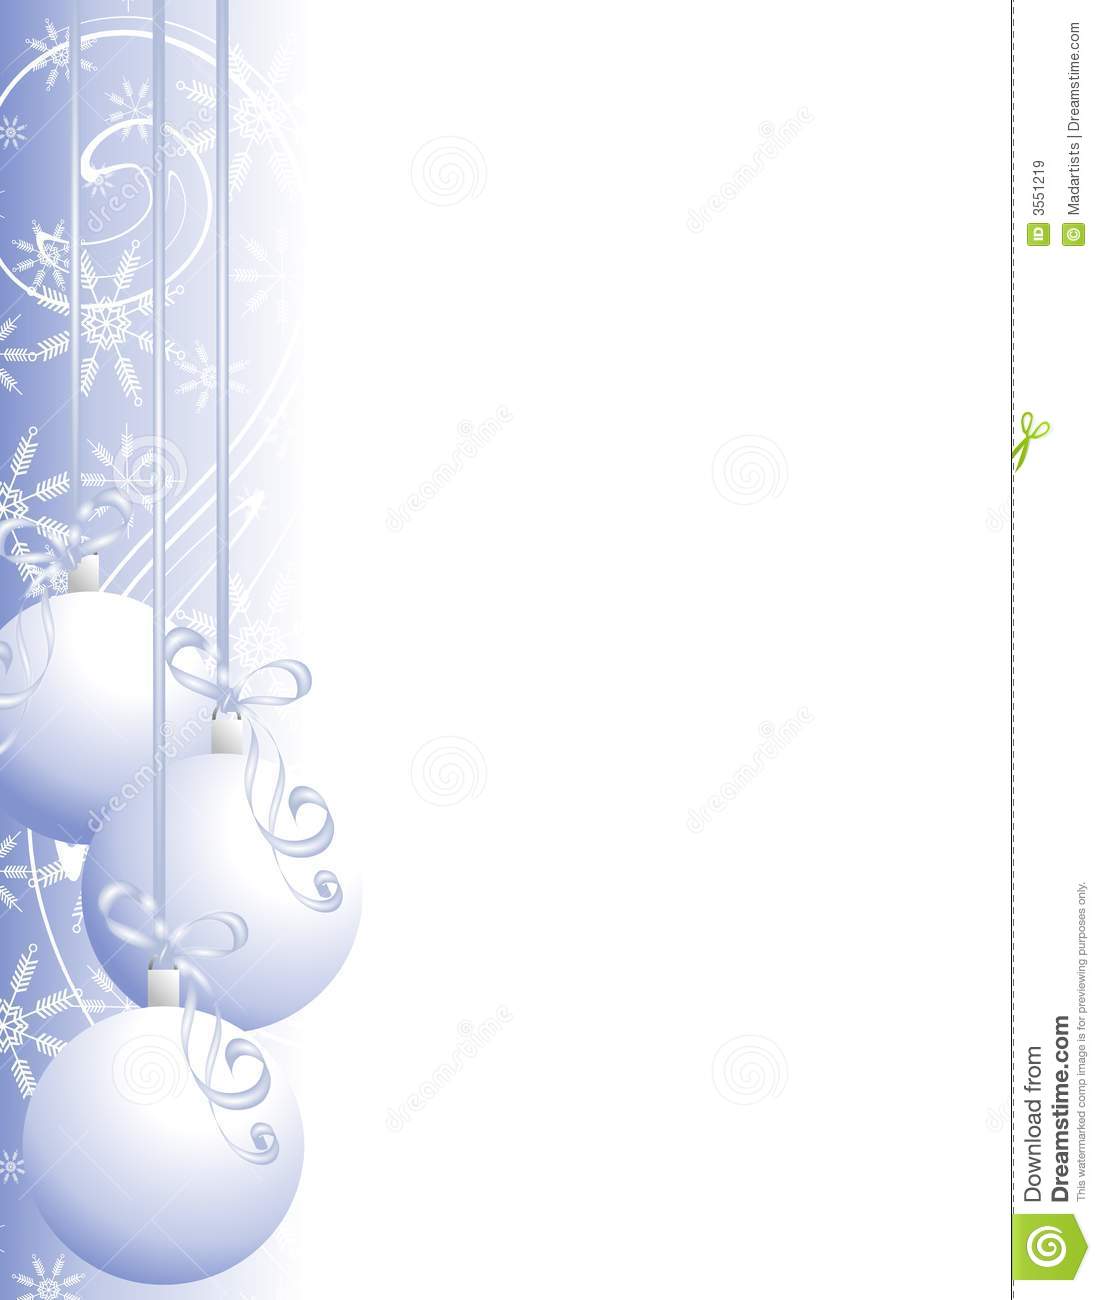 Christmas Page Border With Holiday Embellishments Of Snowflakes And